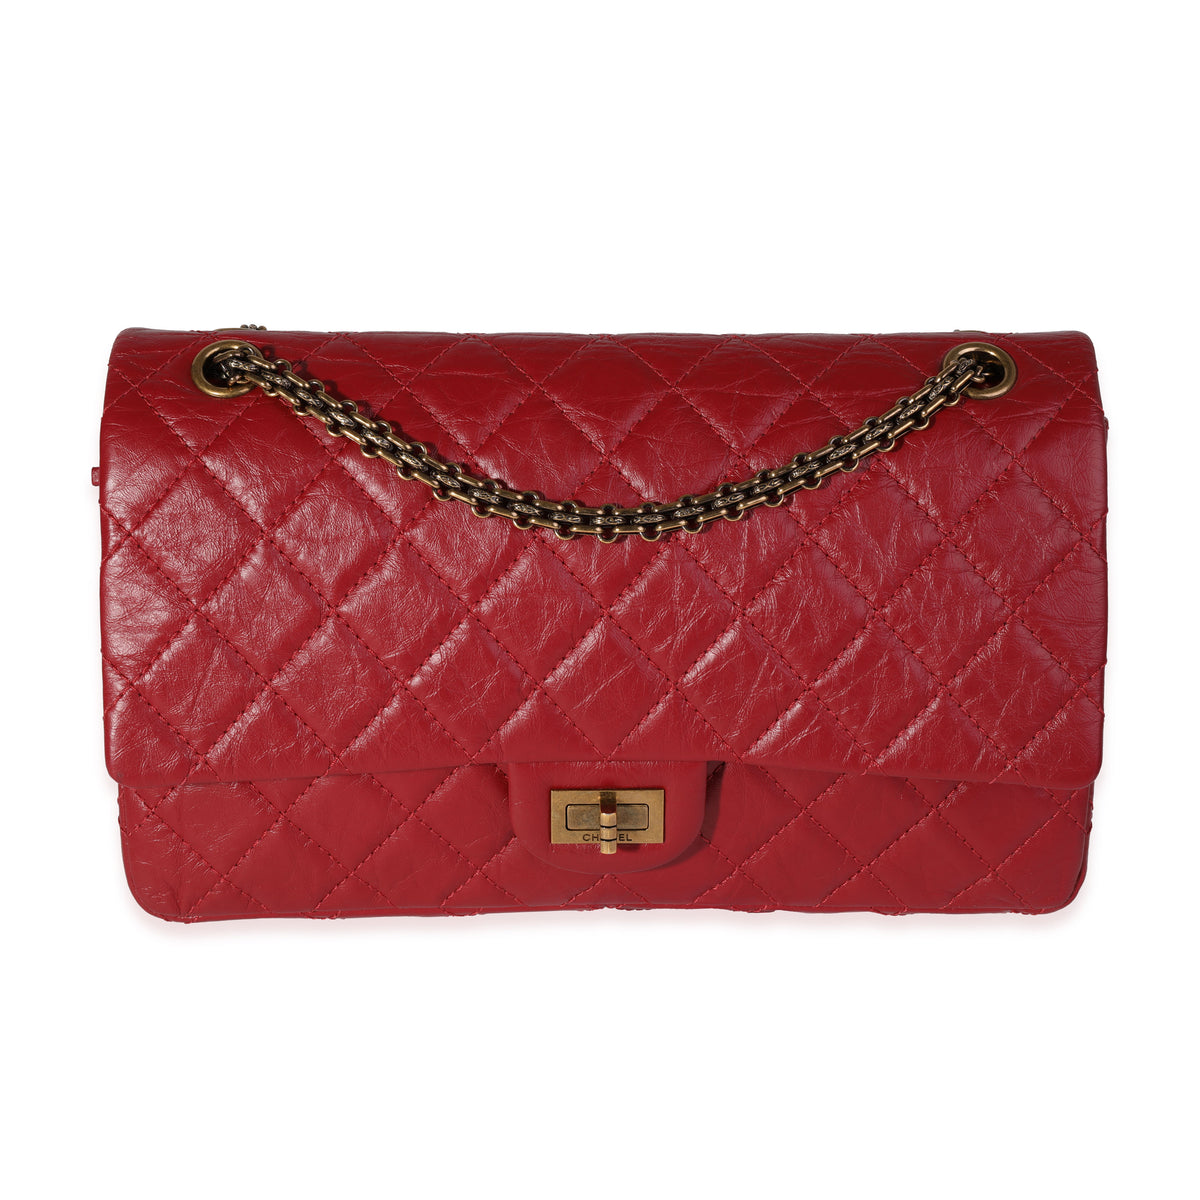 Chanel Red Quilted Aged Calfskin Reissue 2.55 226 Double Flap Bag